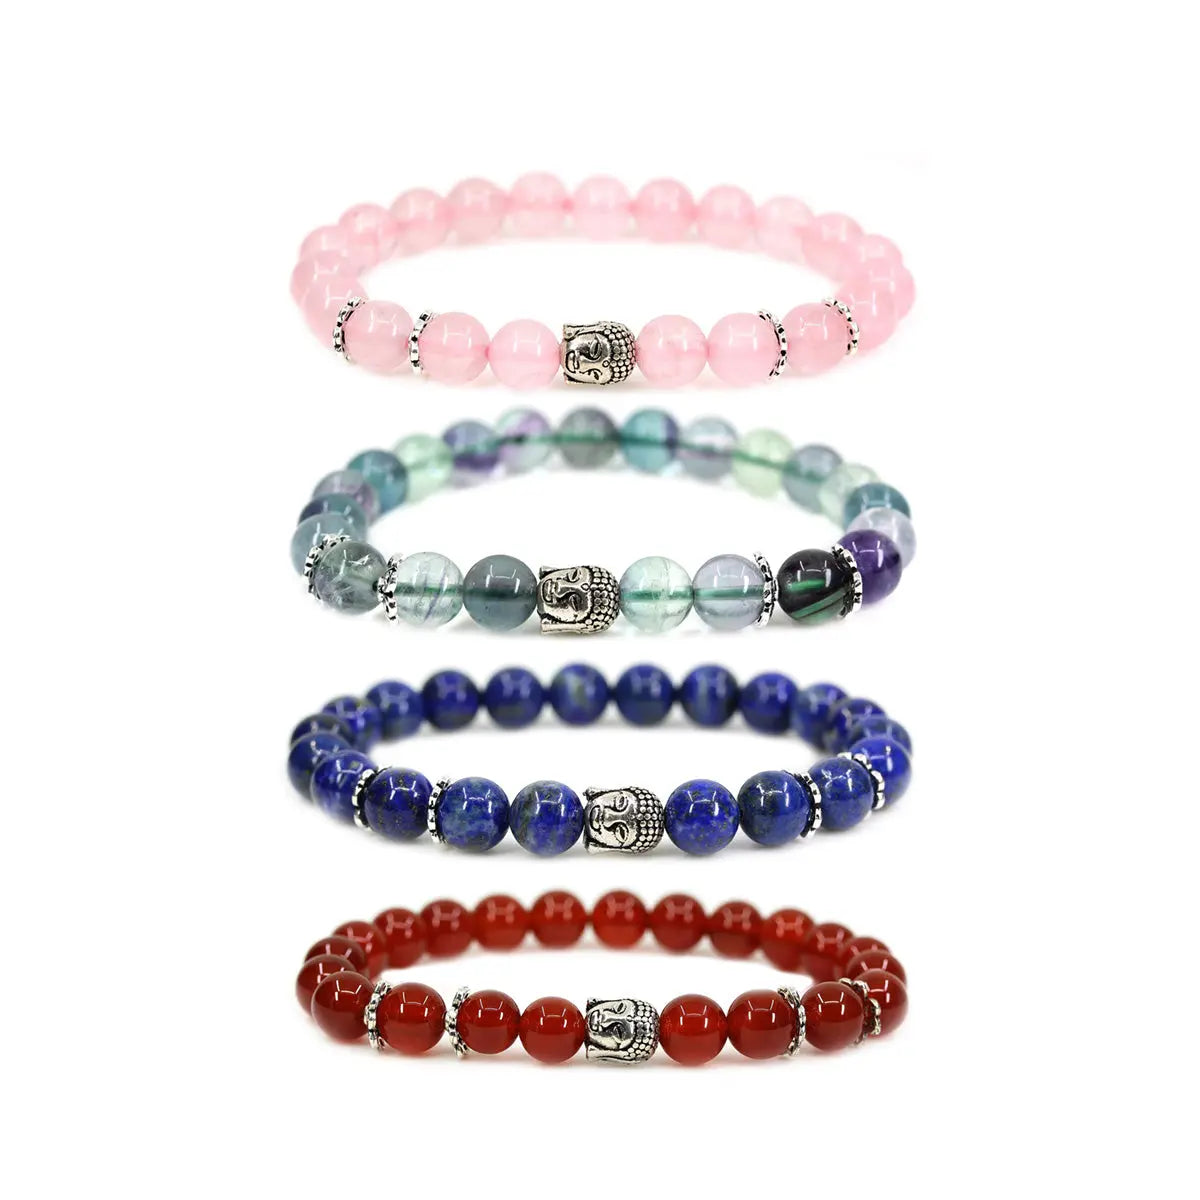 Feng Shui Buddha Crystal Bracelet - 16 Different Crystals Healing Crystal Home